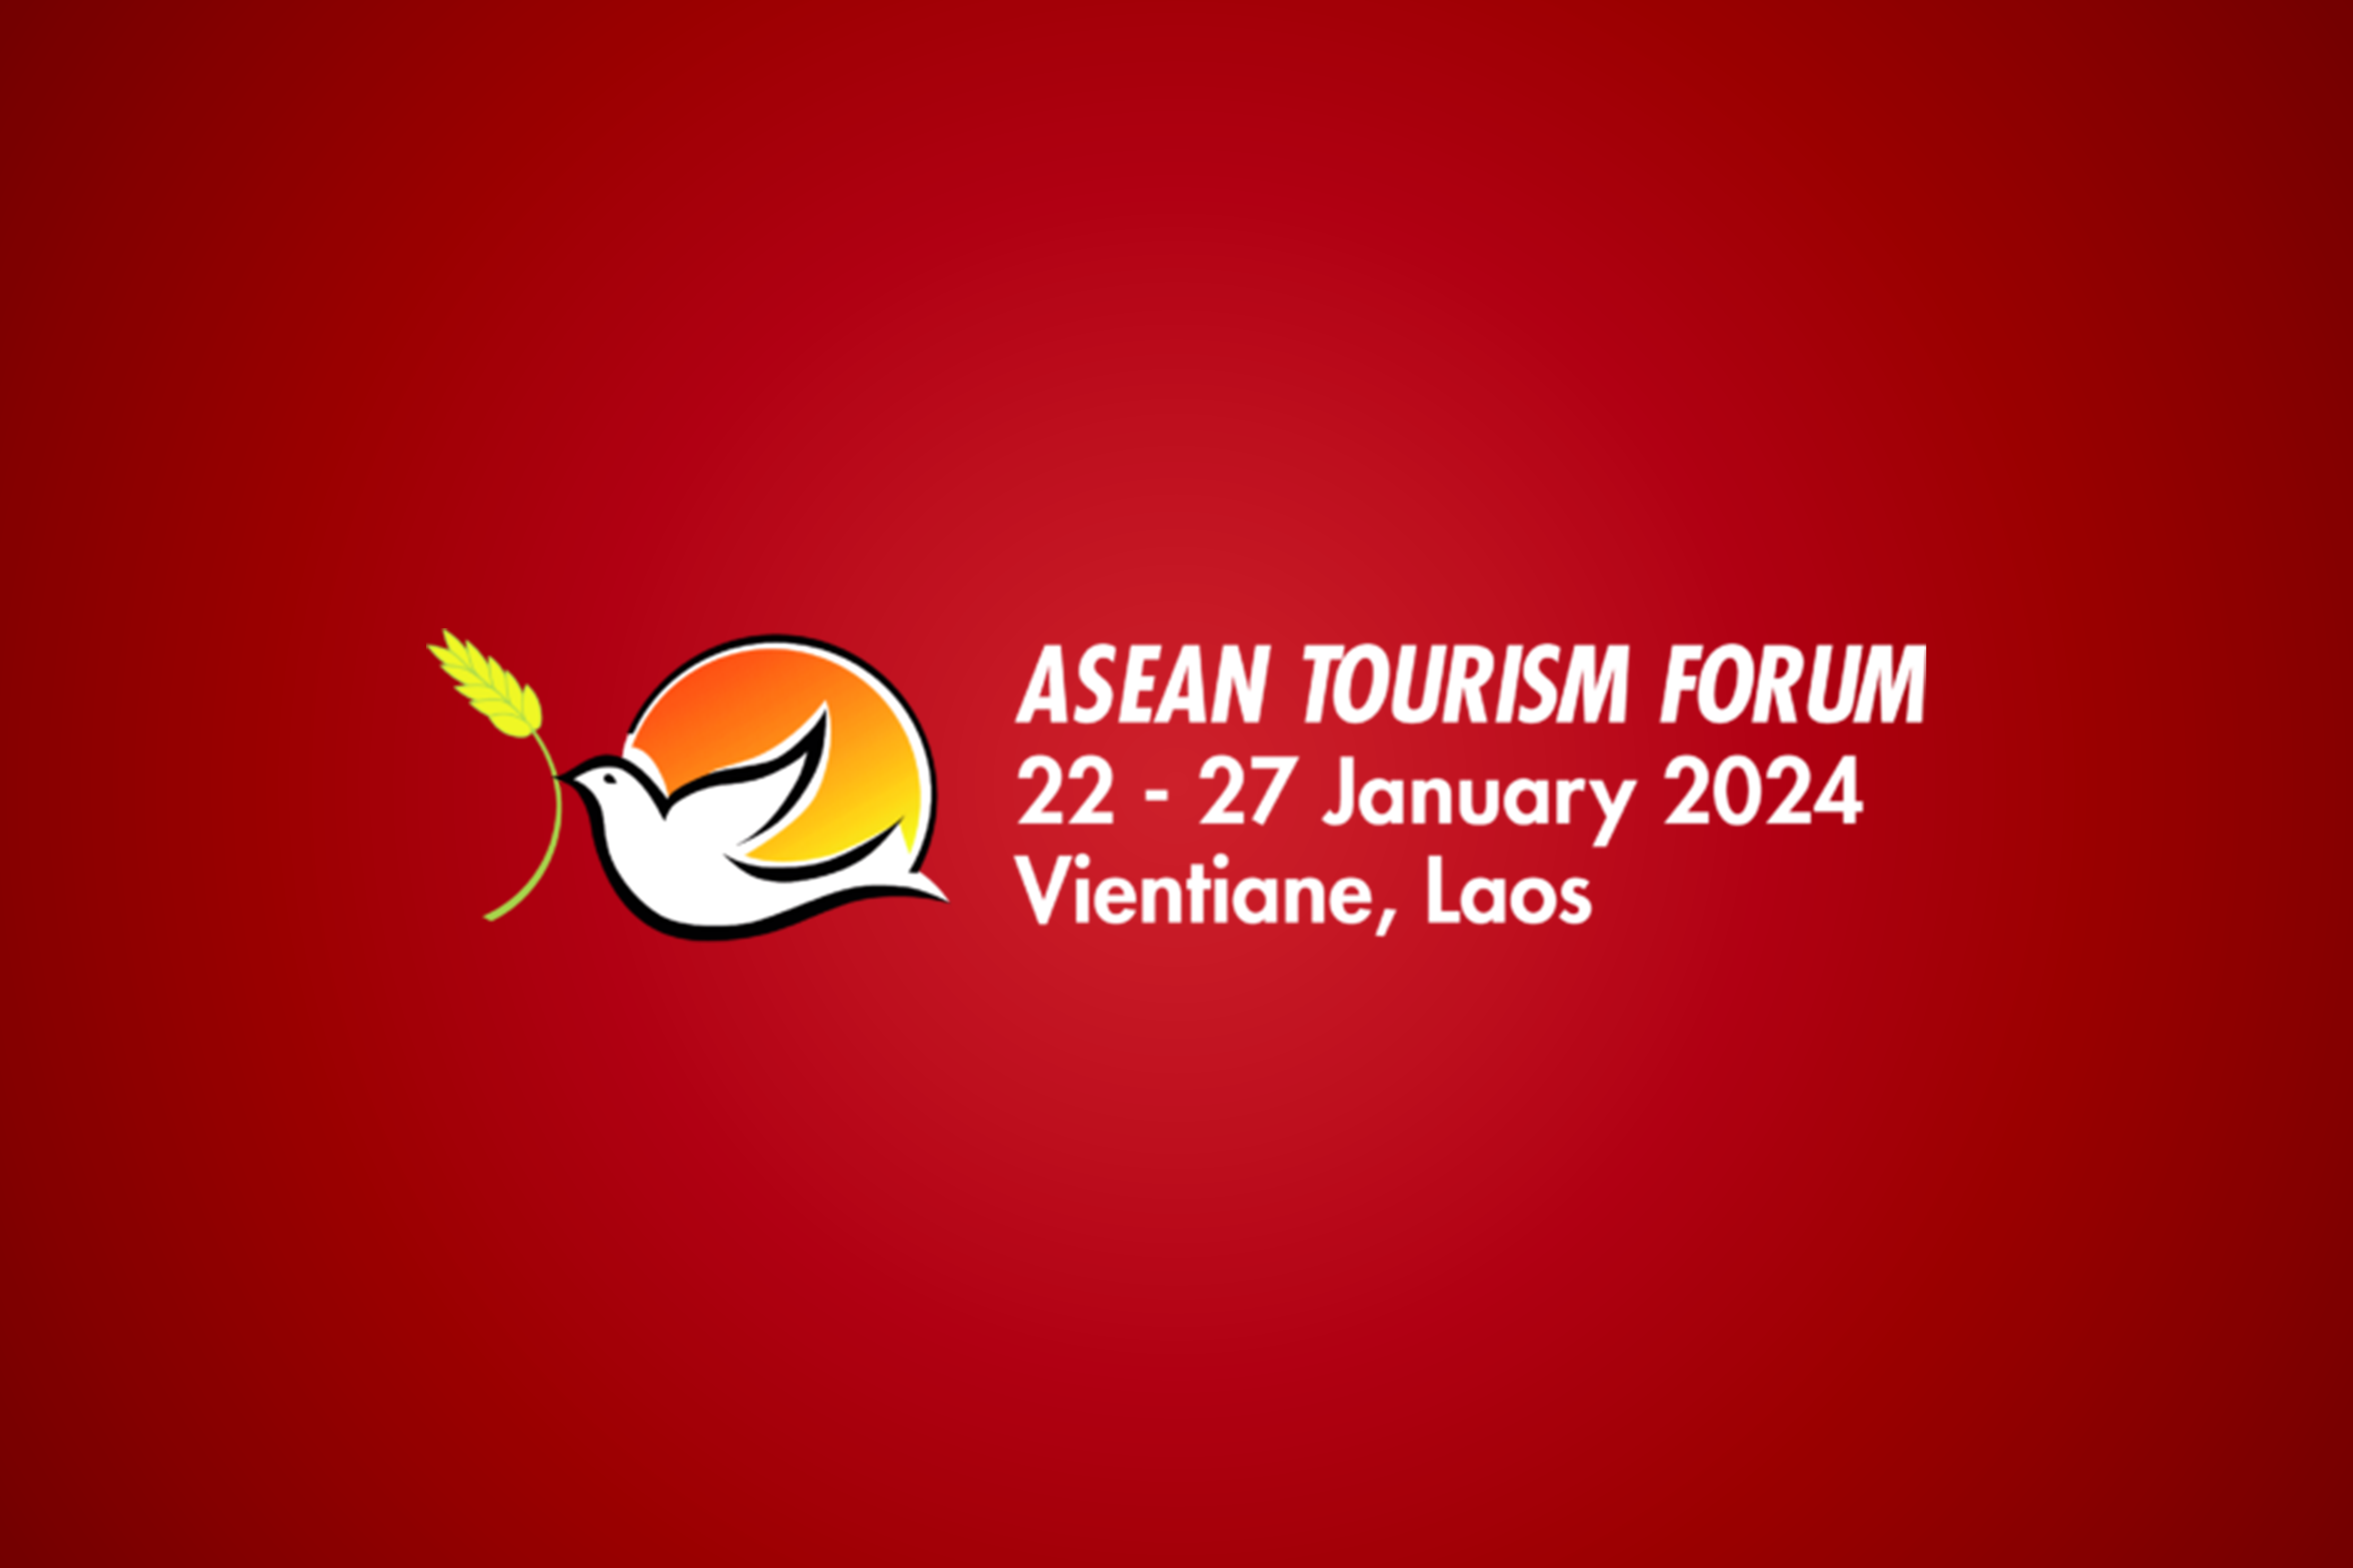 Frasco to lead Ph delegation at the ASEAN tourism forum 2024 in Laos